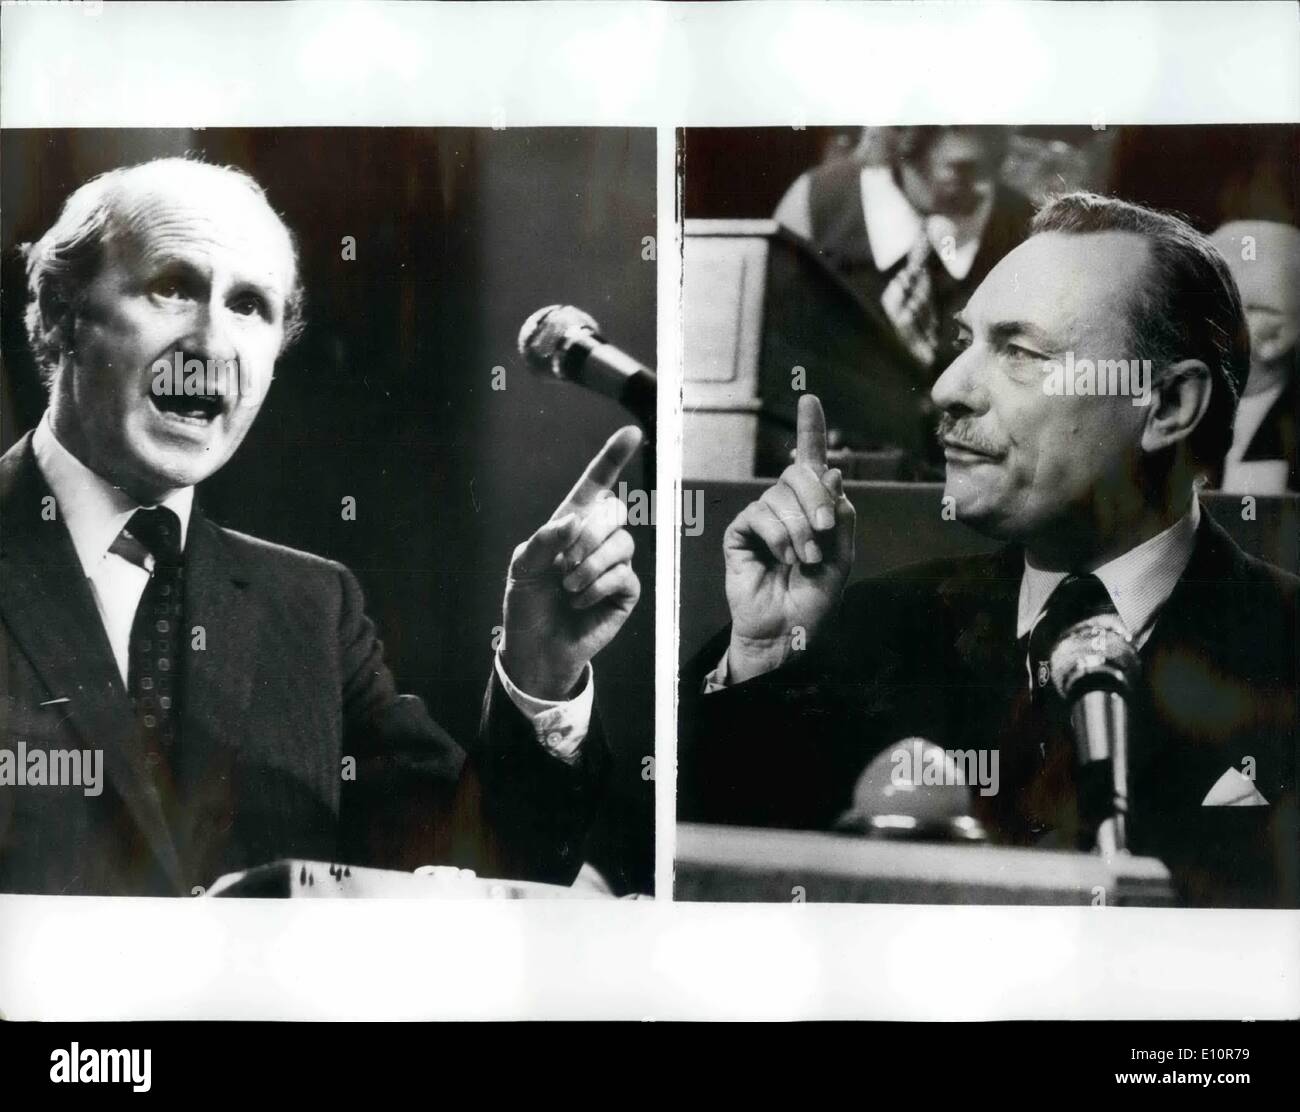 Oct. 10, 1973 - Chancellor Anthony Barber Attacks Enoch Powell At the Conservative Party Conference at Blackpool: Mr Anthony Barber, the Chancellor of the Exchequer, yesterday made a ferocious attack on Enoch Powell during the Conservative Party Conference at Blackpool, when he called Mr. Powell- a conceited, Arrogant and frustrated fanatic.Photo Shows Mr. Anthony barber (left) pictured during his dramatic speech attacking Mr. Enoch Powell(right) when both spoke at yesterday's conference. Stock Photo